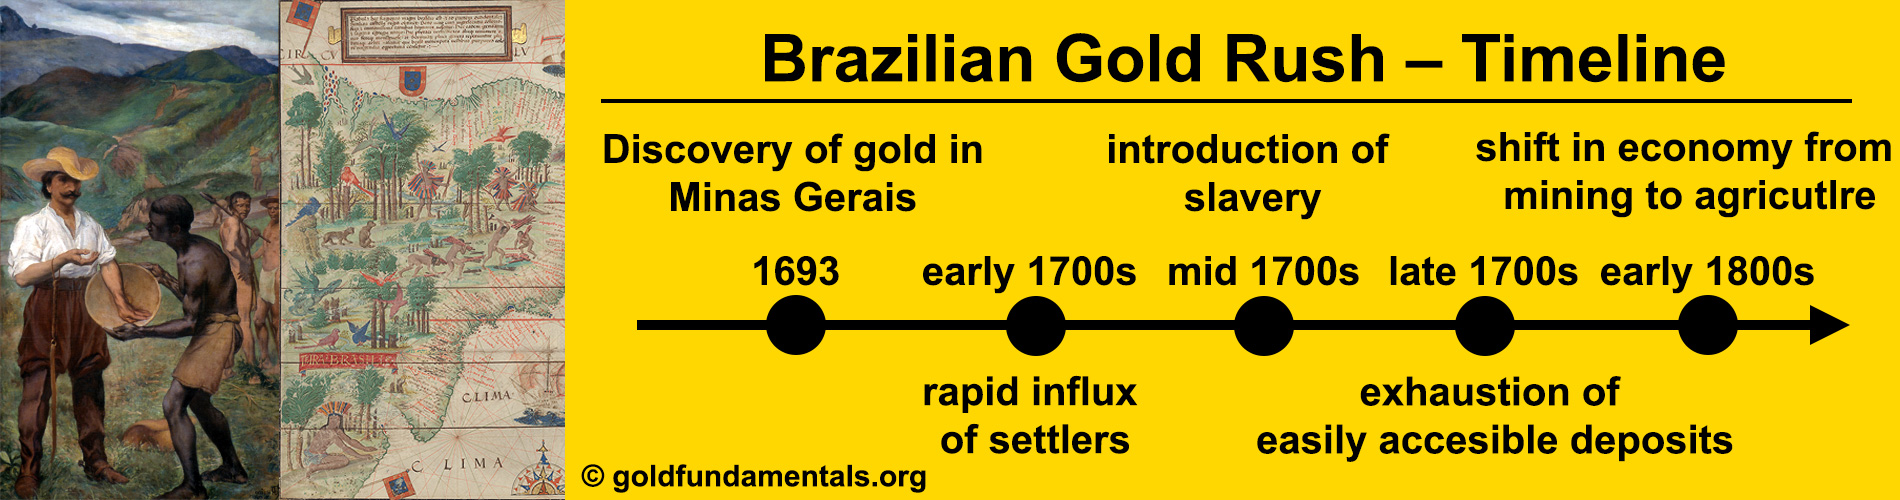 Brazilian Gold Rush 1693 - Timeline of Events.